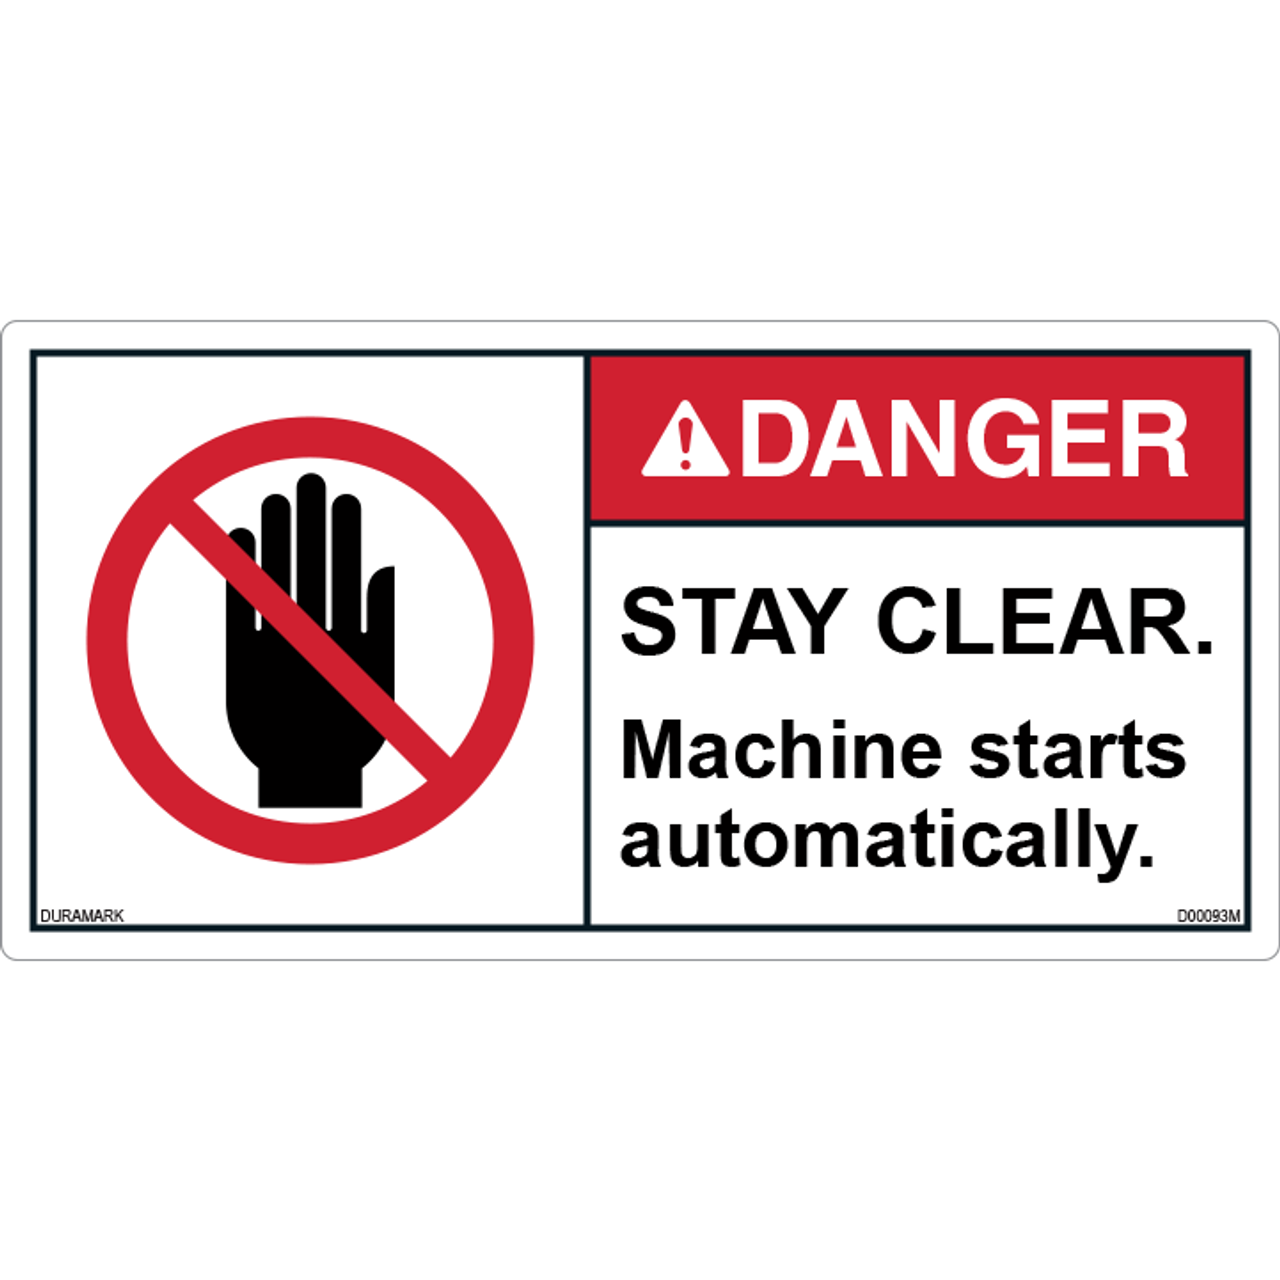 ANSI Safety Label - Danger - Stay Clear - Machine Starts Automatically